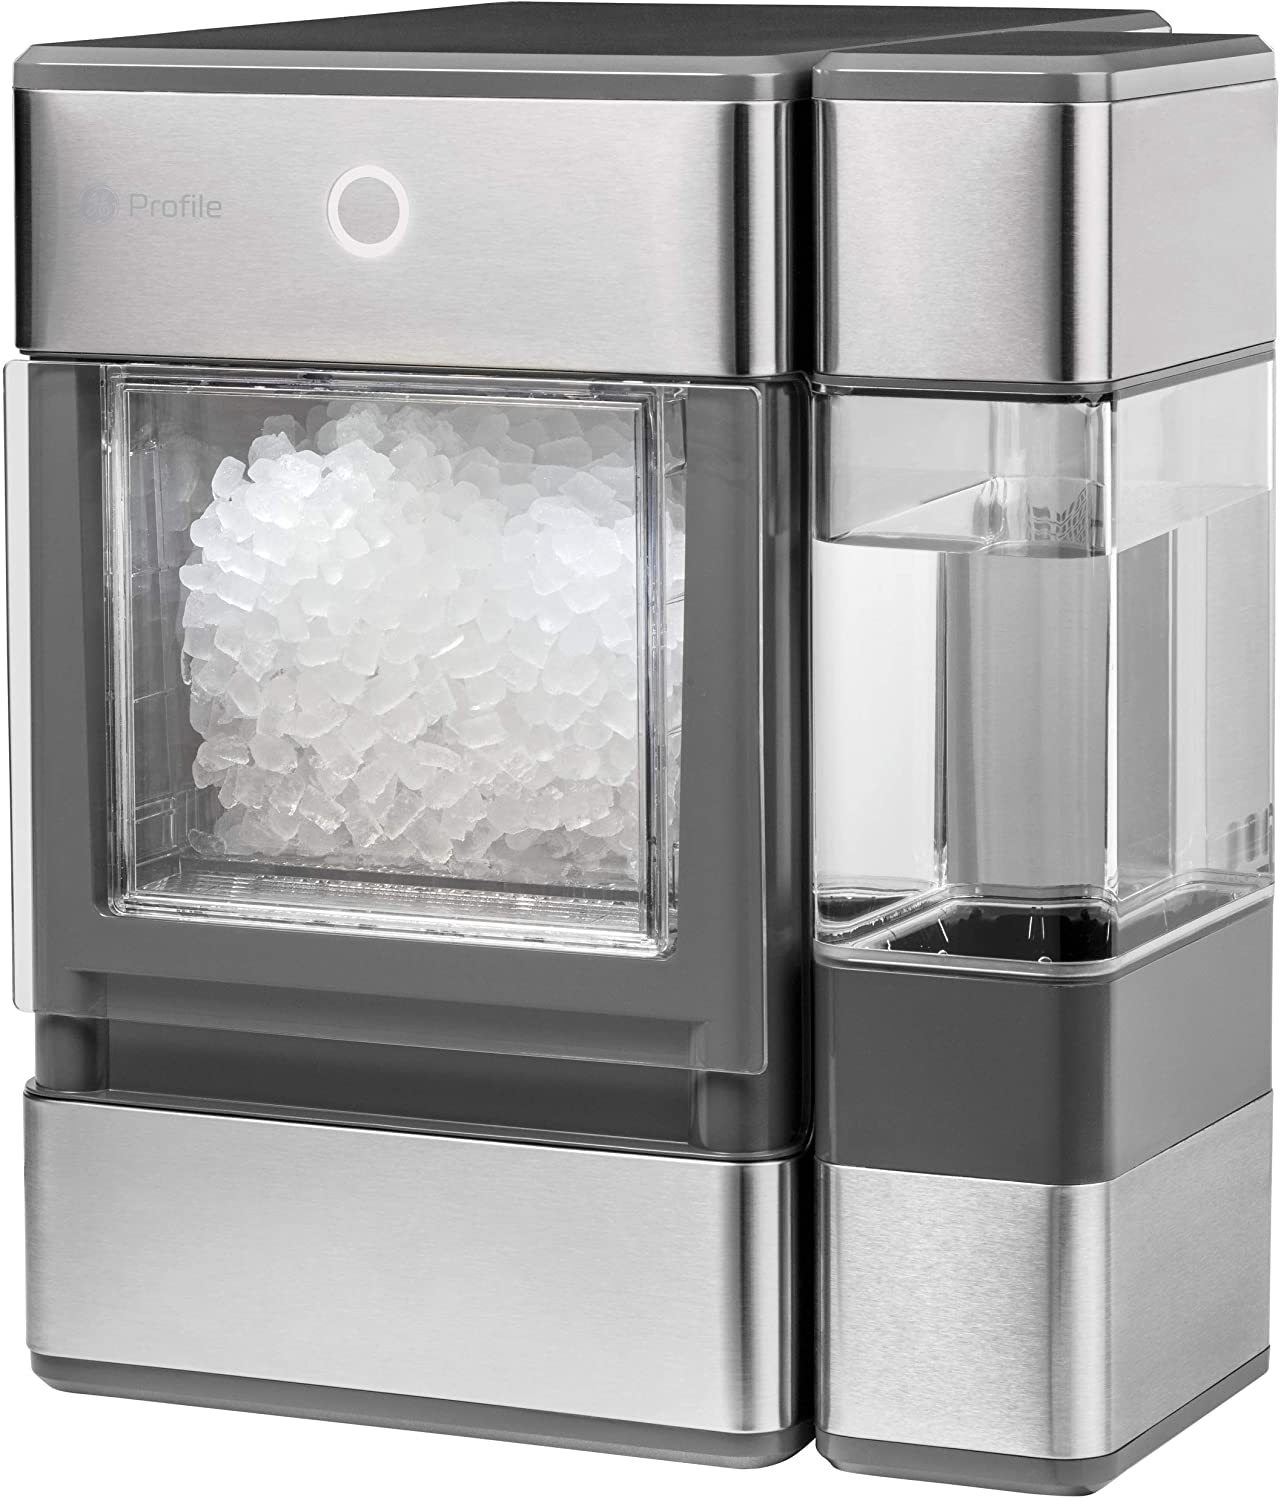 Photo 1 of GE Profile OPAL01GEPKT Opal  Countertop Nugget Ice Maker Stainless Steel Wrap with Gray Accents  LED Lighting

damaged